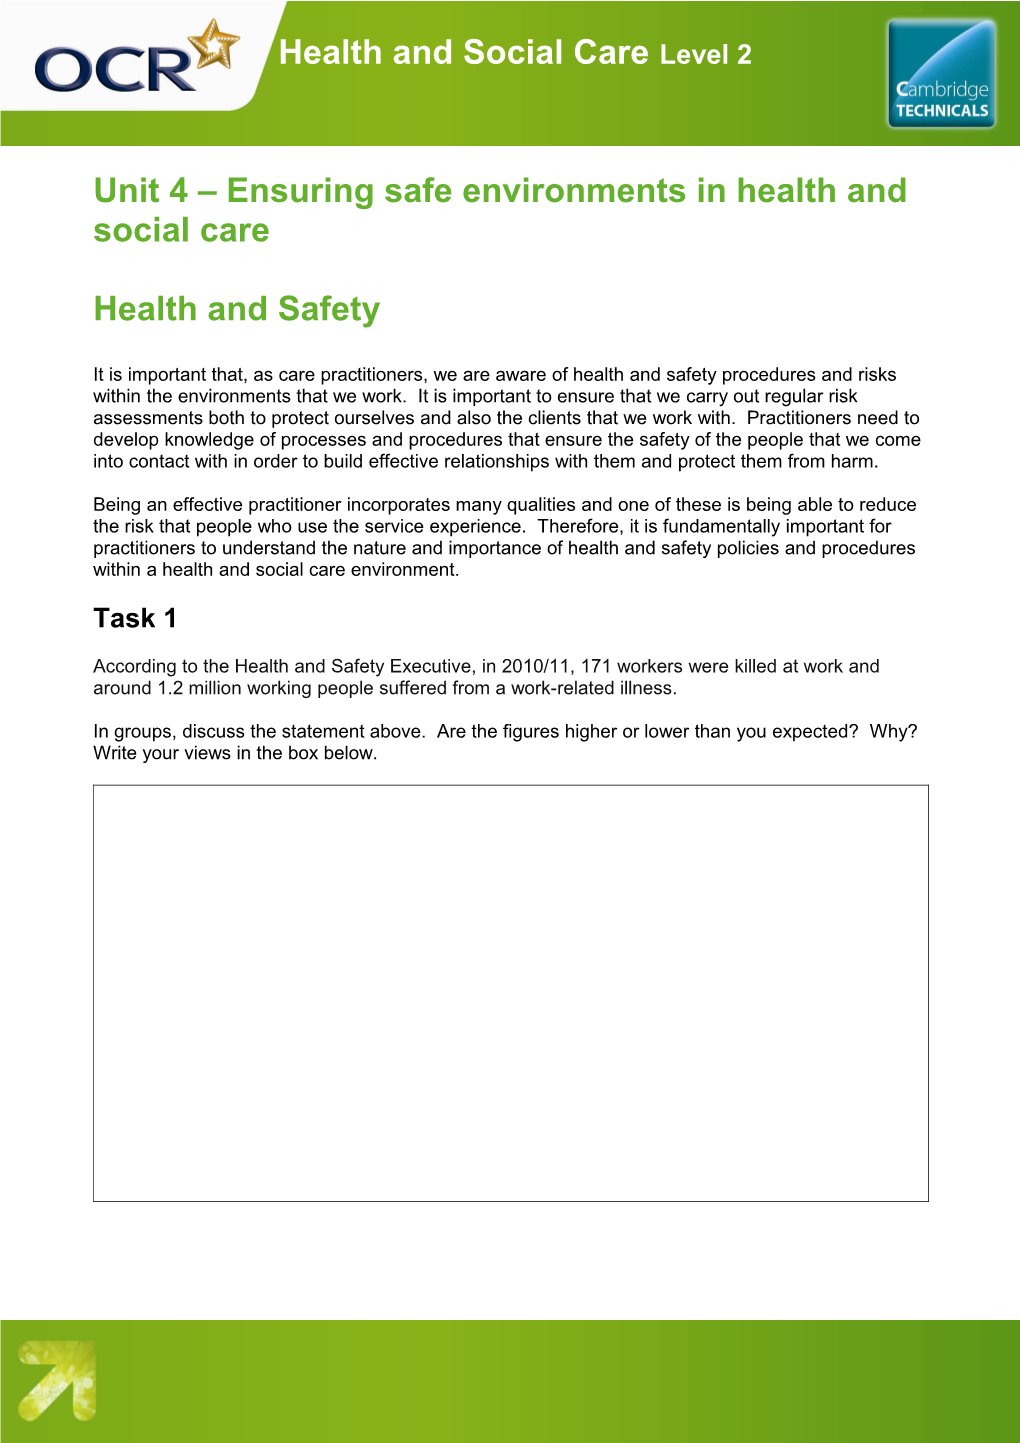 Unit 4 Ensuring Safe Environments in Health and Social Care